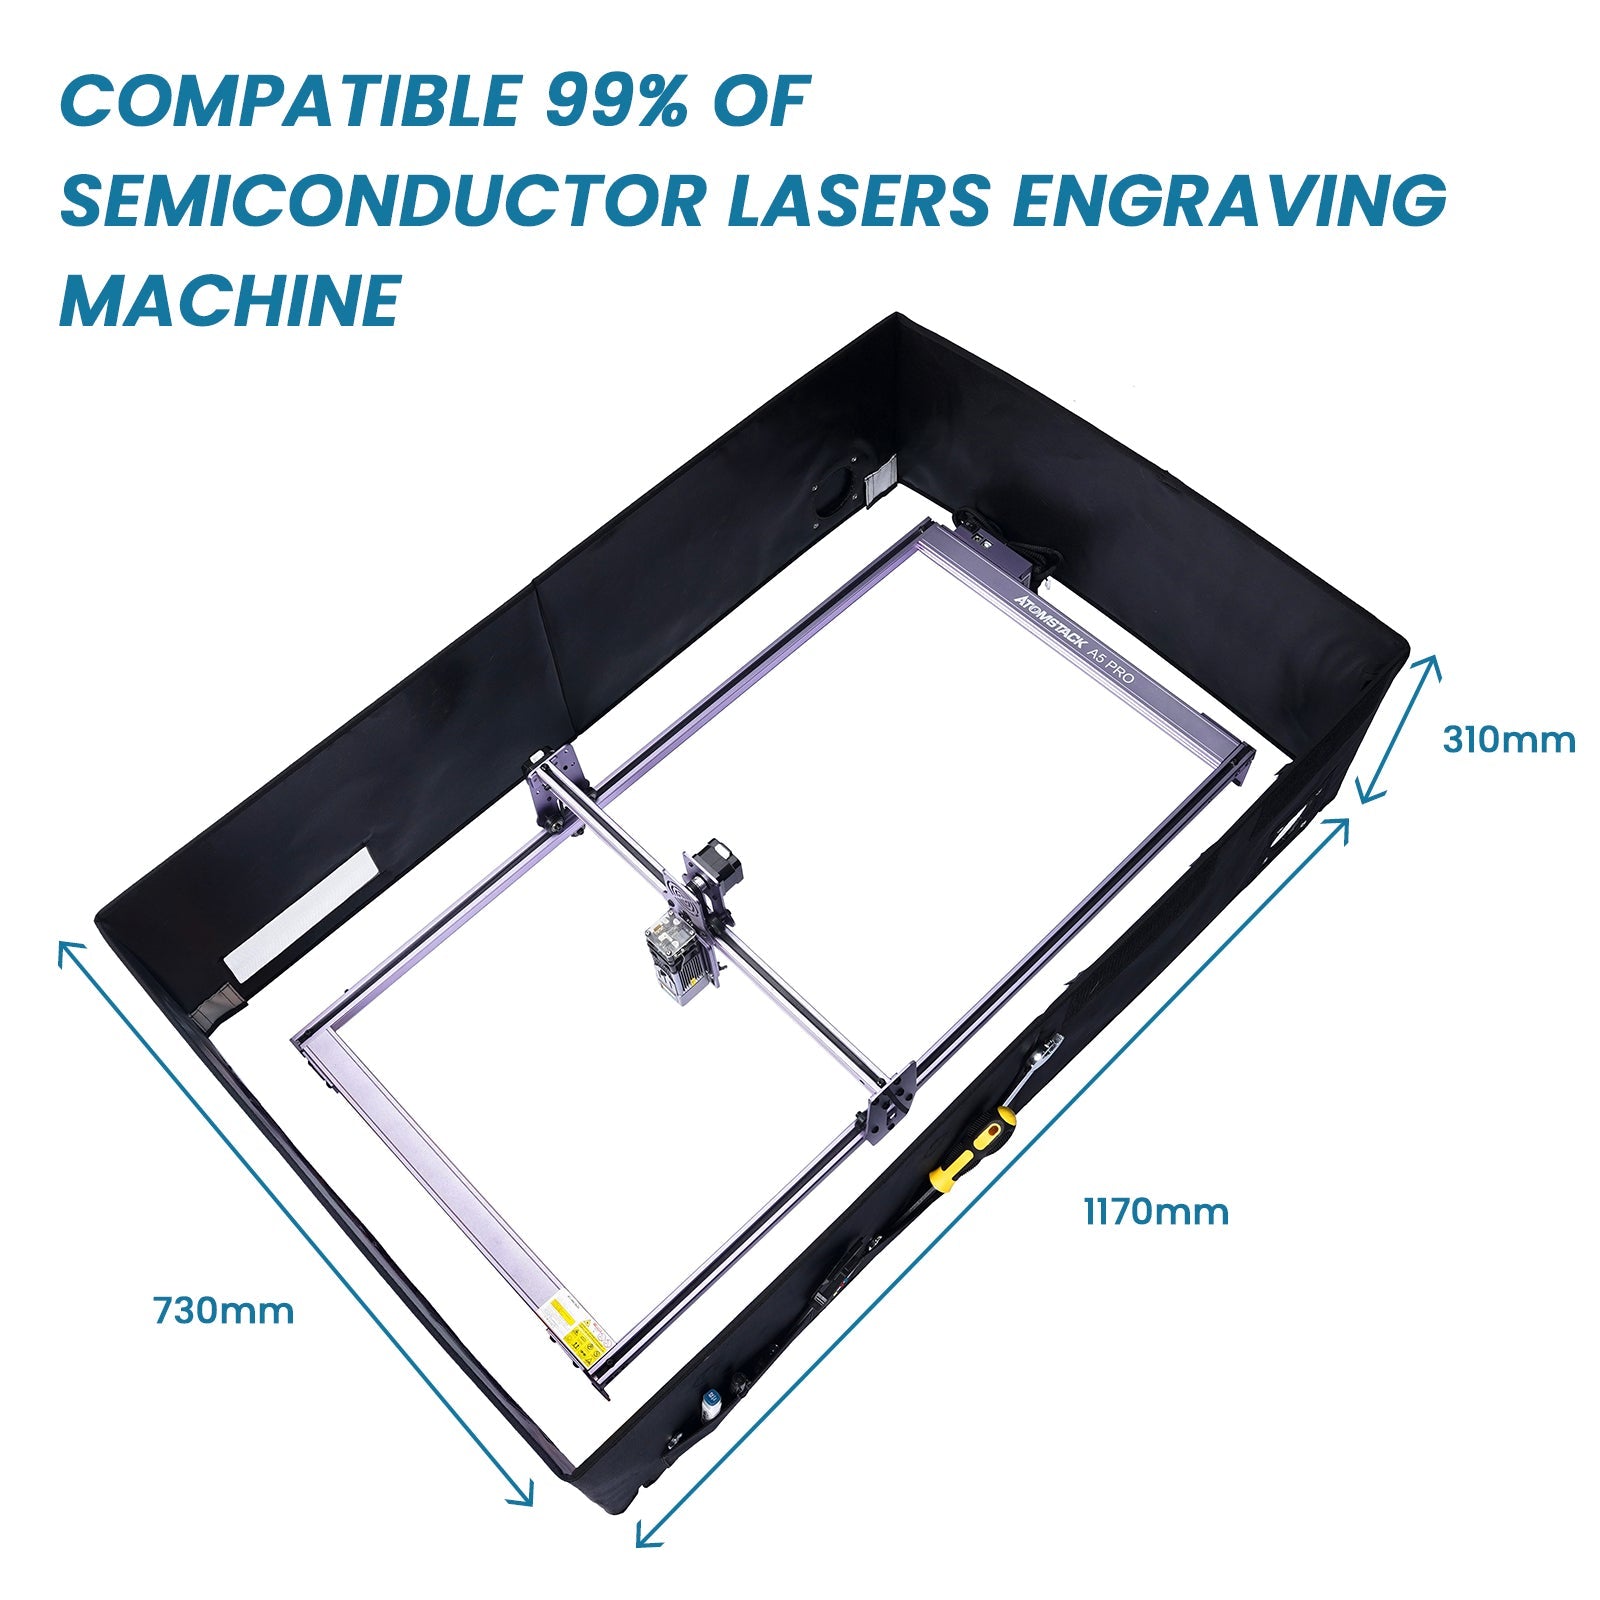 ATOMSTACK FB2 Plus Laser Engraver Enclosure 1170 * 730 * 310mm with Exhaust Vent & Pipe, Fireproof Dustproof Foldable Protective Cover Odor Noise Reduction Compatible for Most Engraver Machines